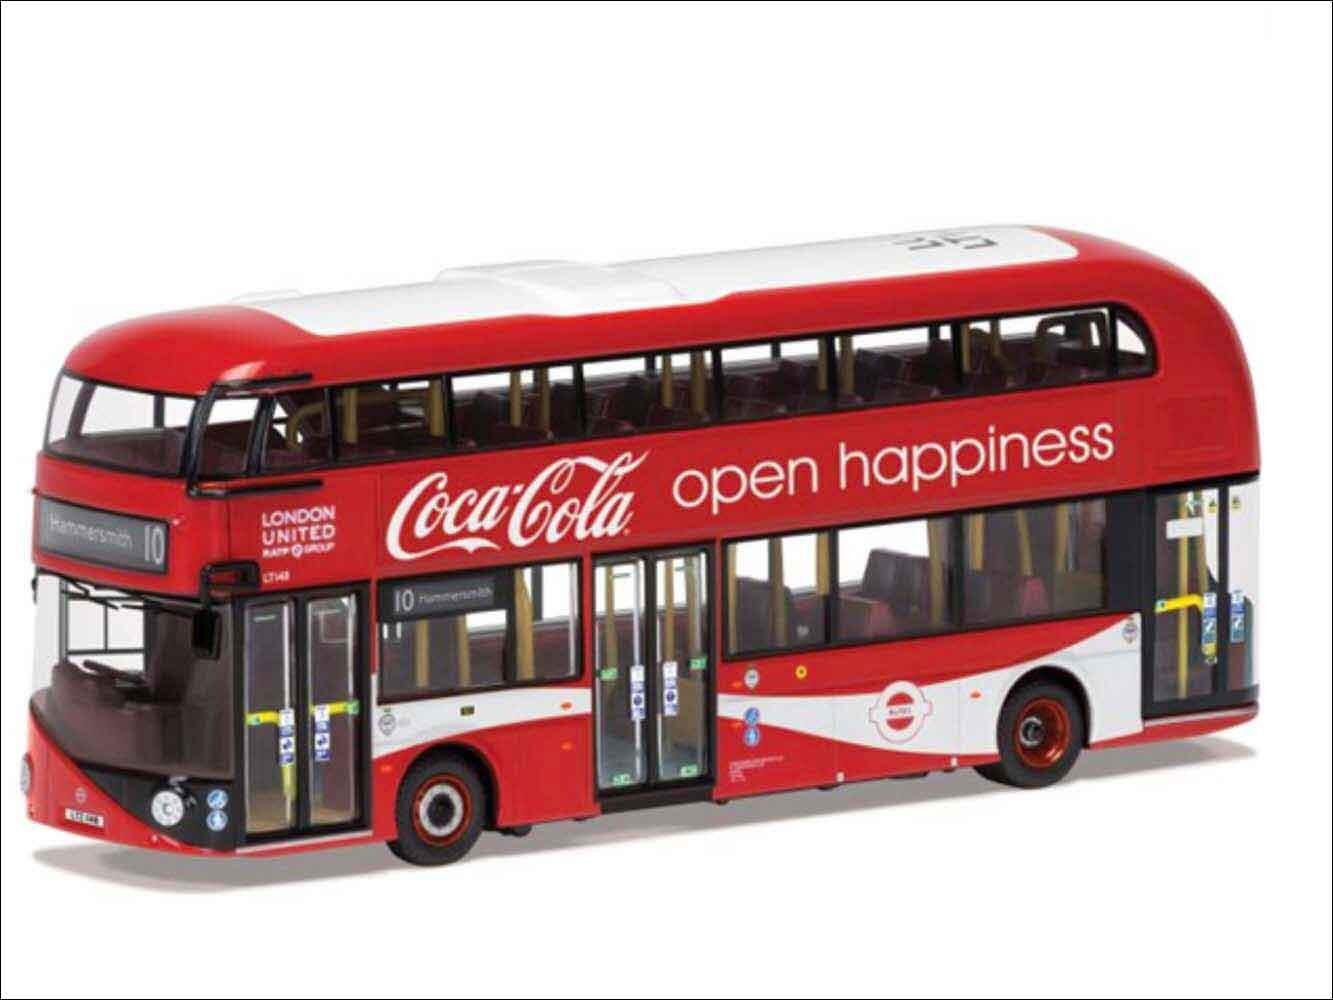 London Bus Route 10 Hammersmith model